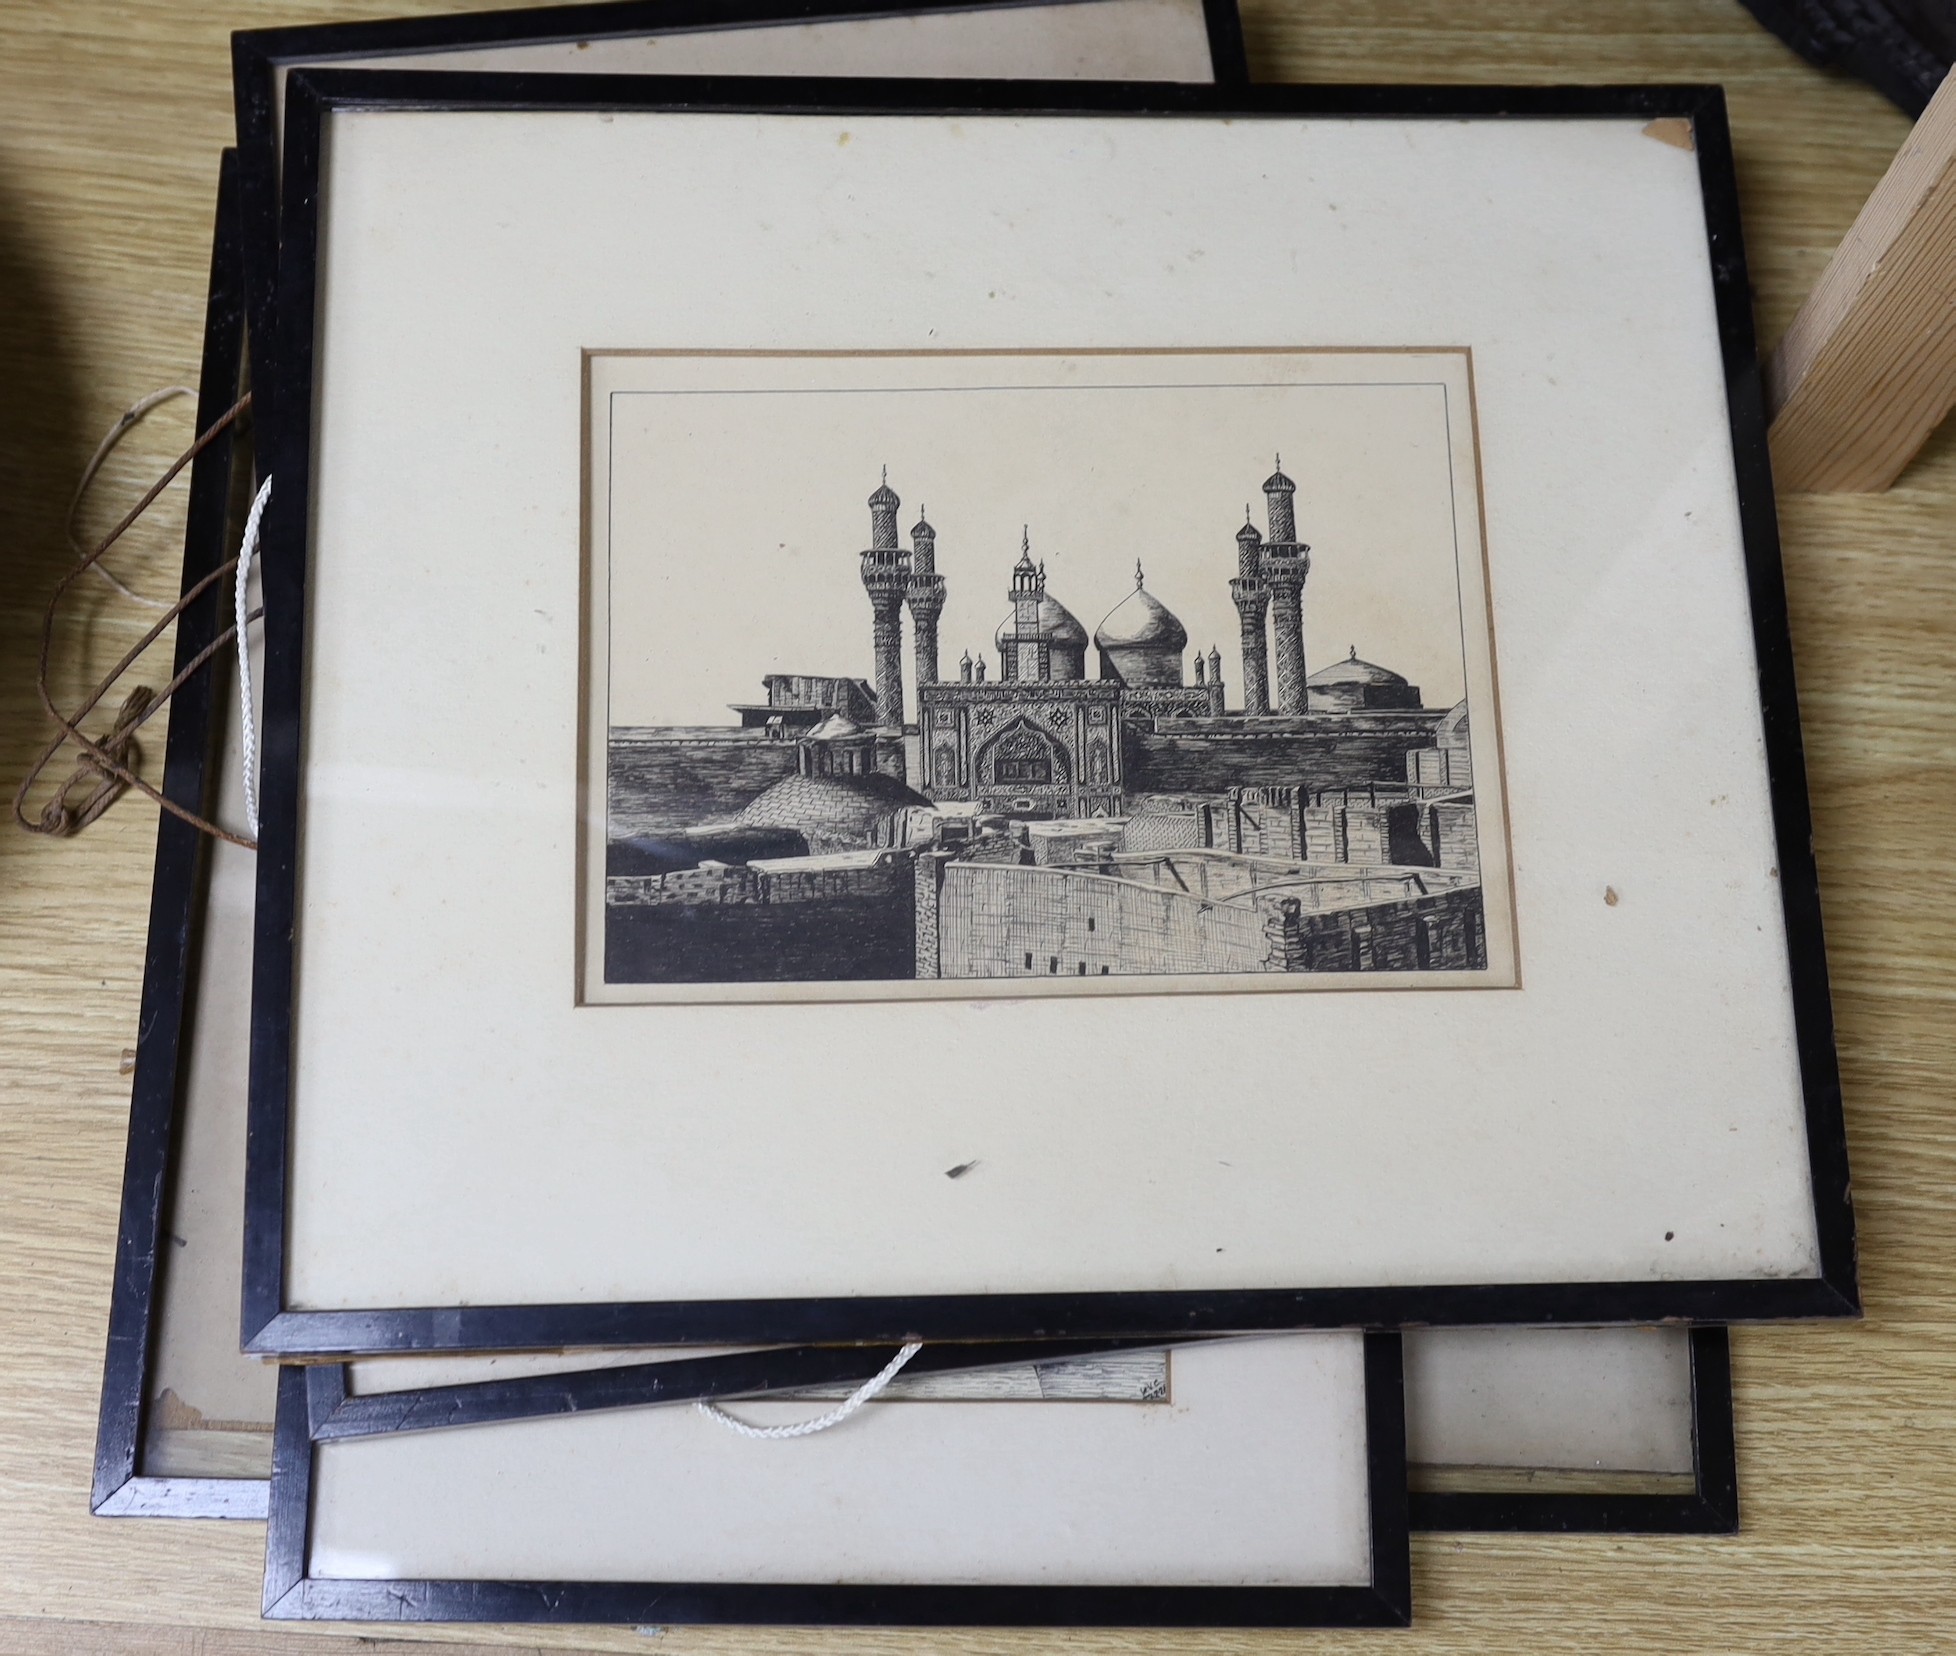 WVC 1926, four pen and ink drawings, Two men riding a camel and three views of mosques, largest 19 x 26cm